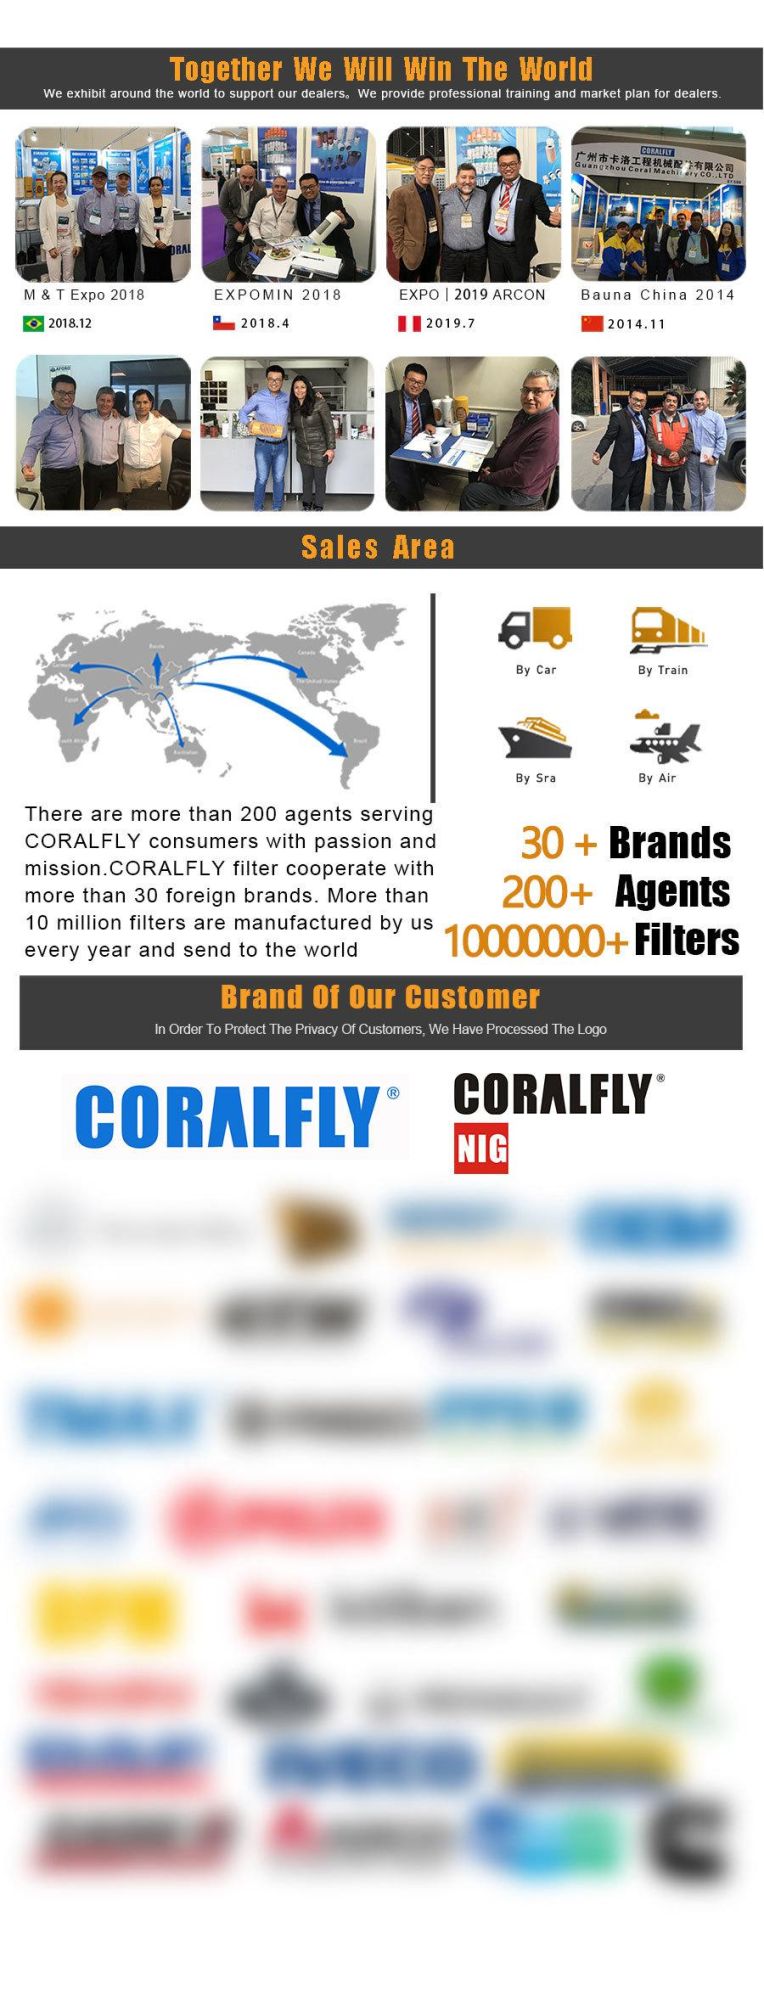 Coralfly Oil Filter Spin-on 01174418 01164406 01174420 01174423 01174417 01174422 01174696 1181749 605417880001 605411880003 for Deutz Oil Filter